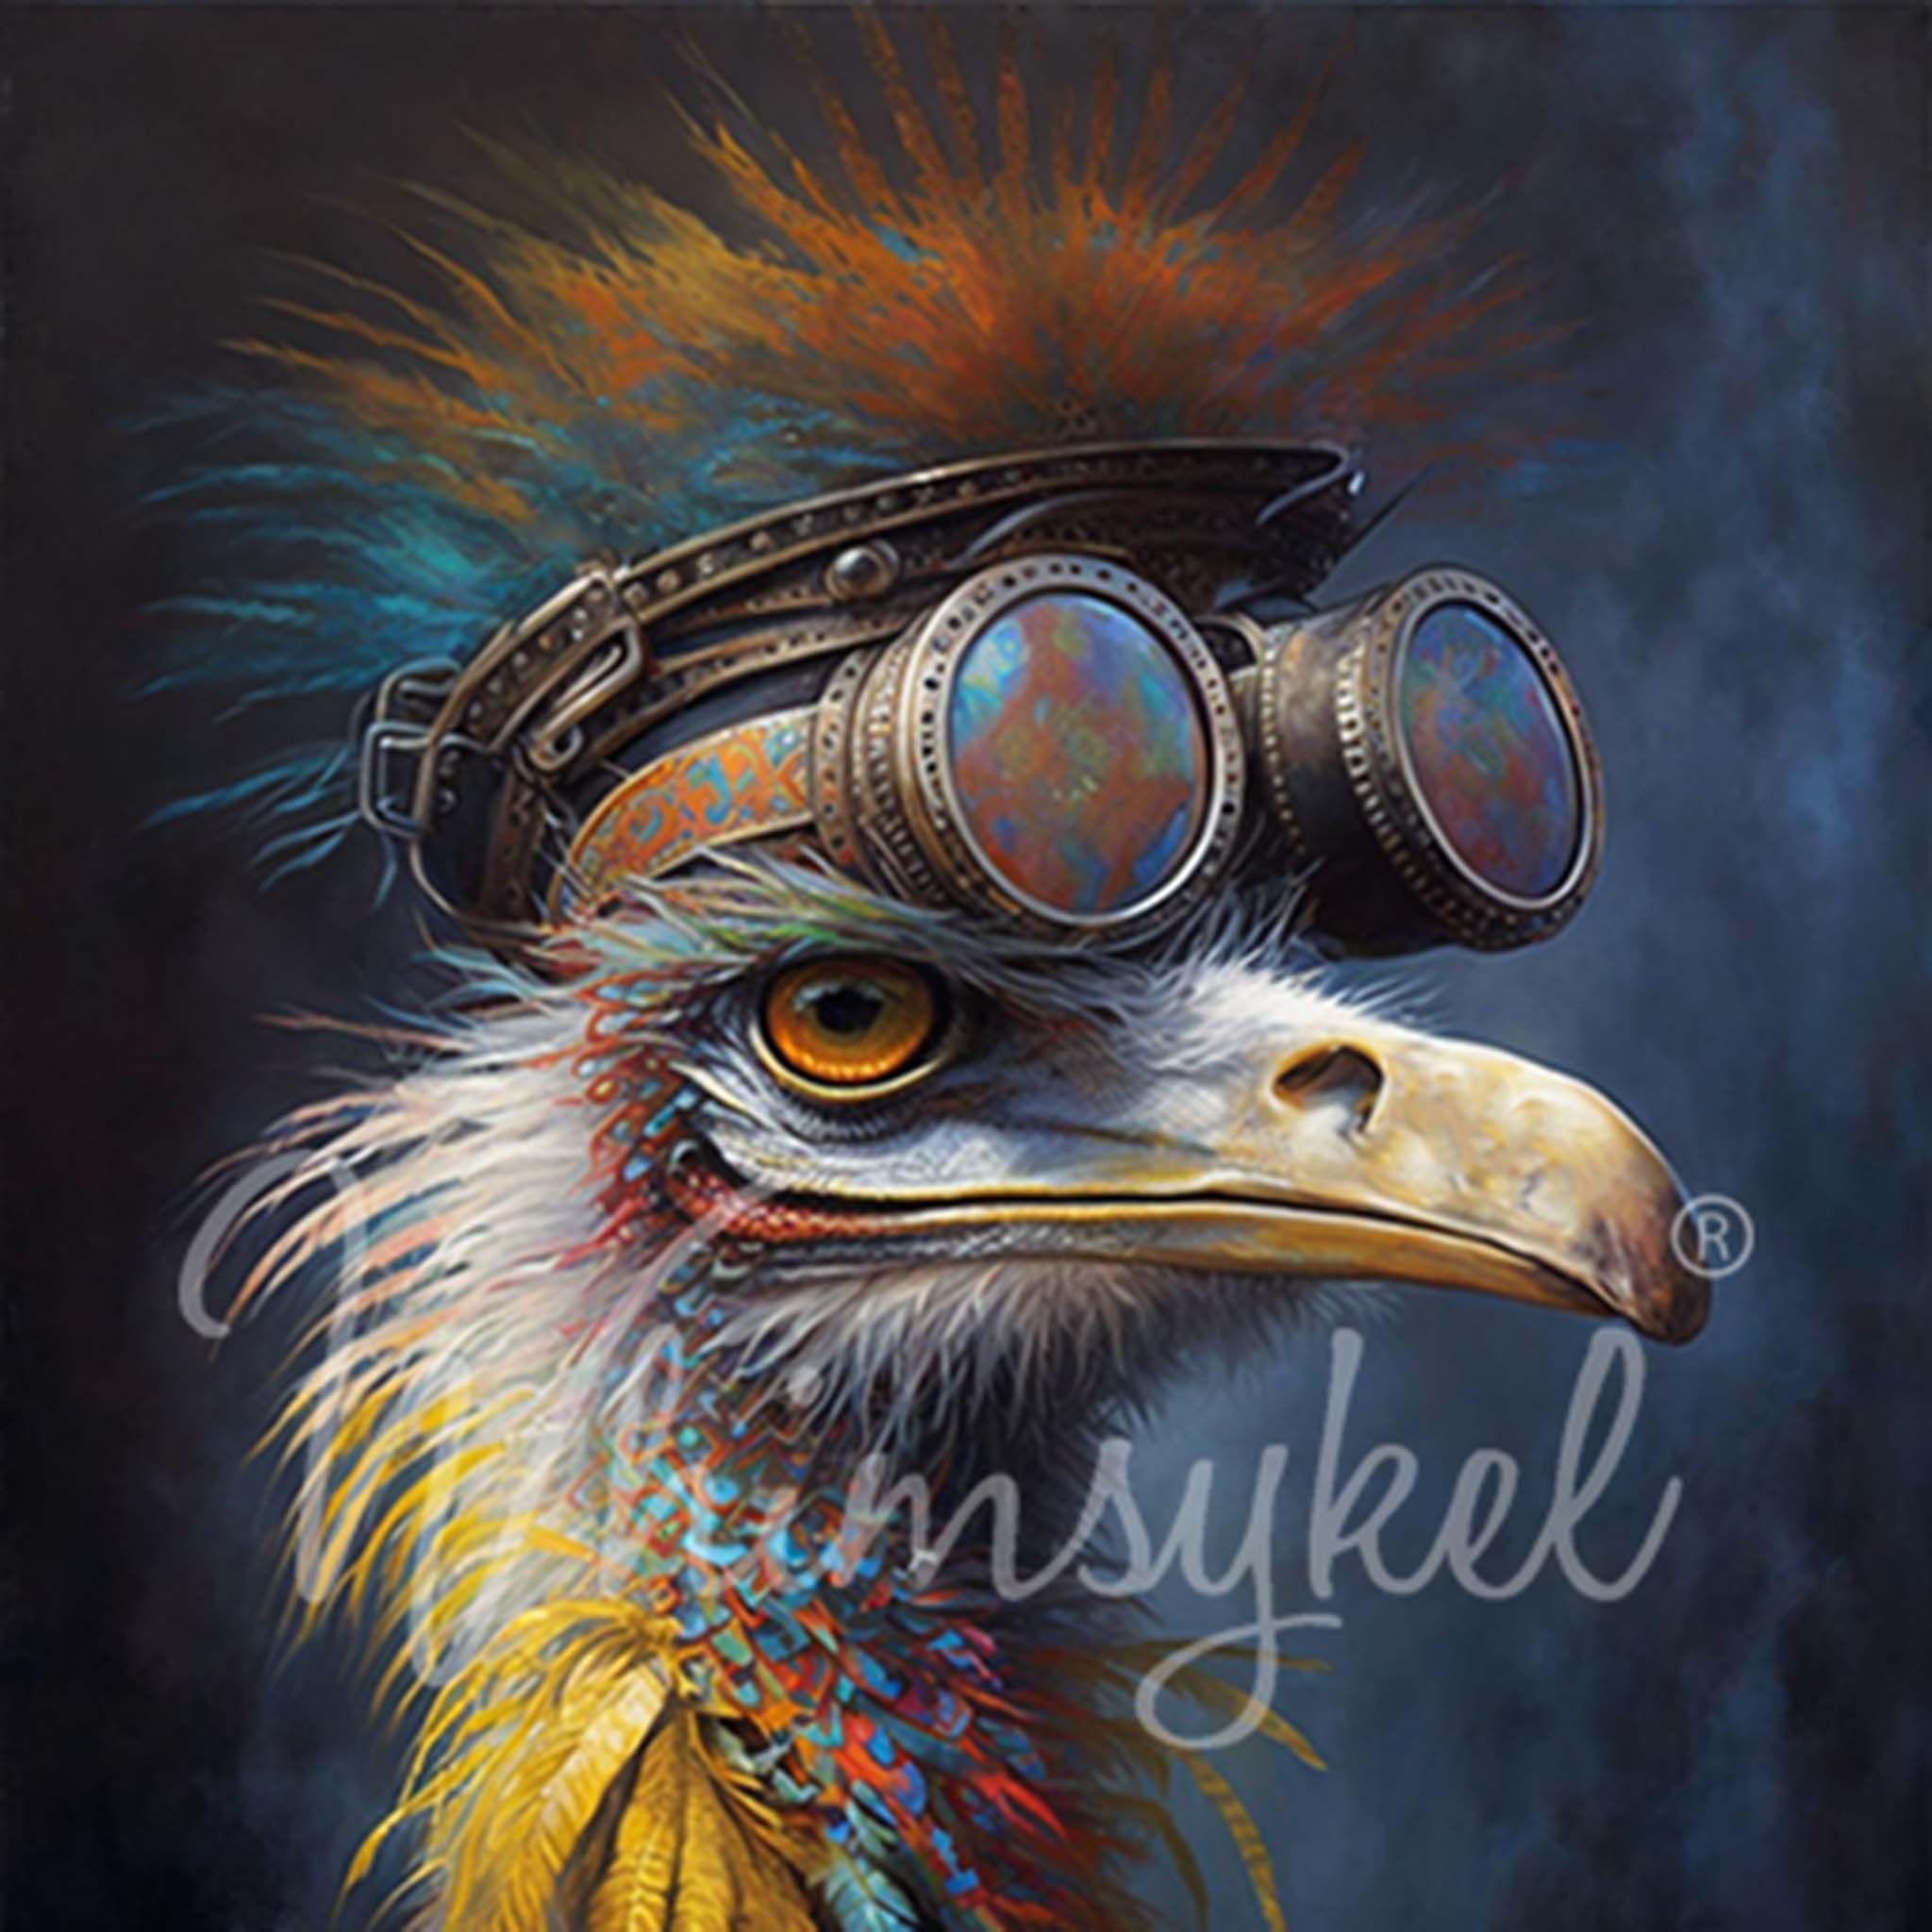 Close-up of a tissue paper design that features a delightful portrait of a bird that exudes a carefree and bohemian spirit with a leather jacket on and a Steampunk style cap and goggles on its head.